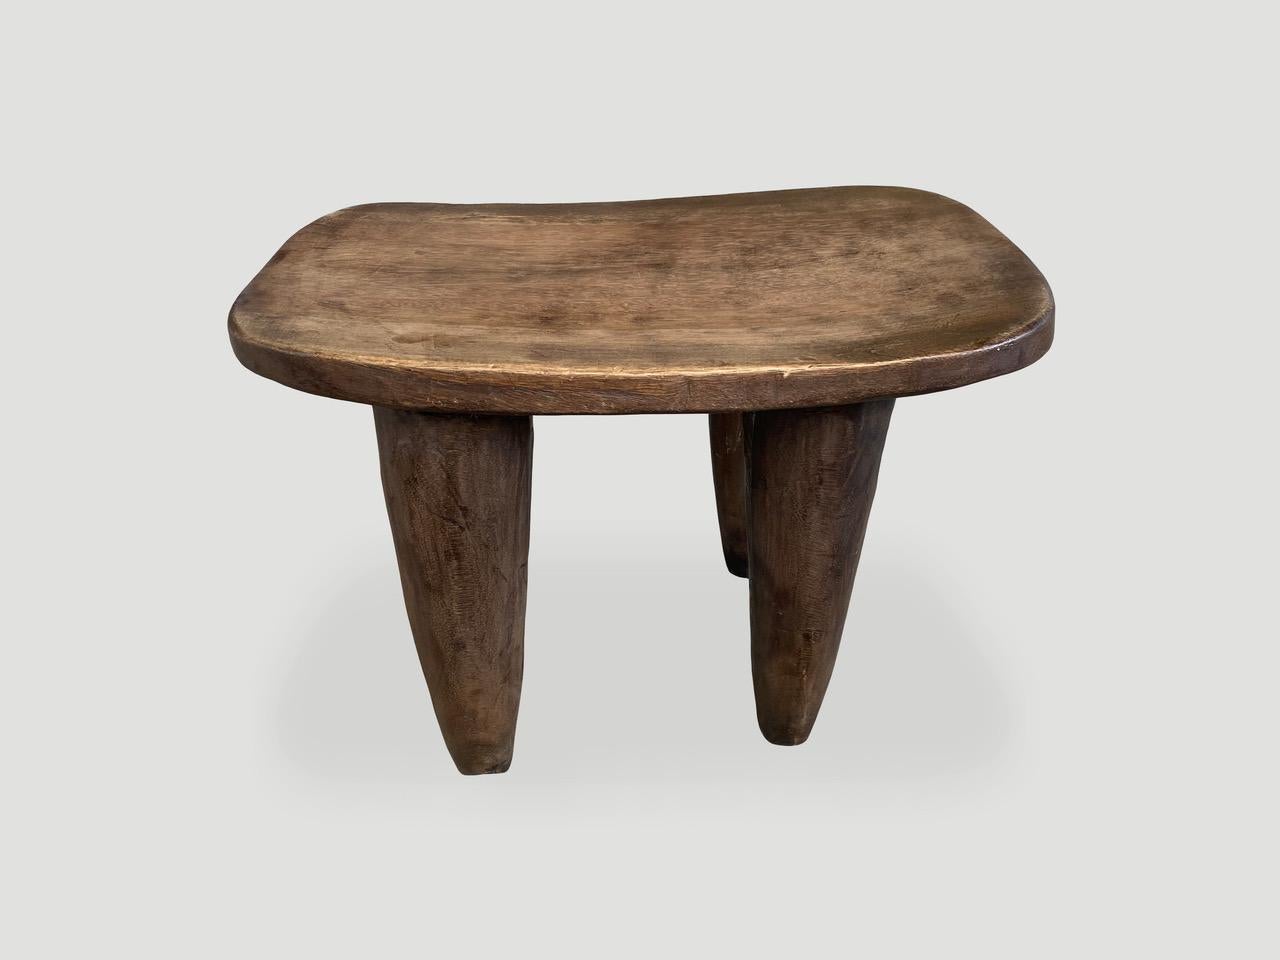 Beautiful antique side table or small bench, hand carved from a single block of wood with beautiful patina. Both sculptural and usable. Shown with cone style legs. We only source the best. 

This side table or stool was sourced in the spirit of